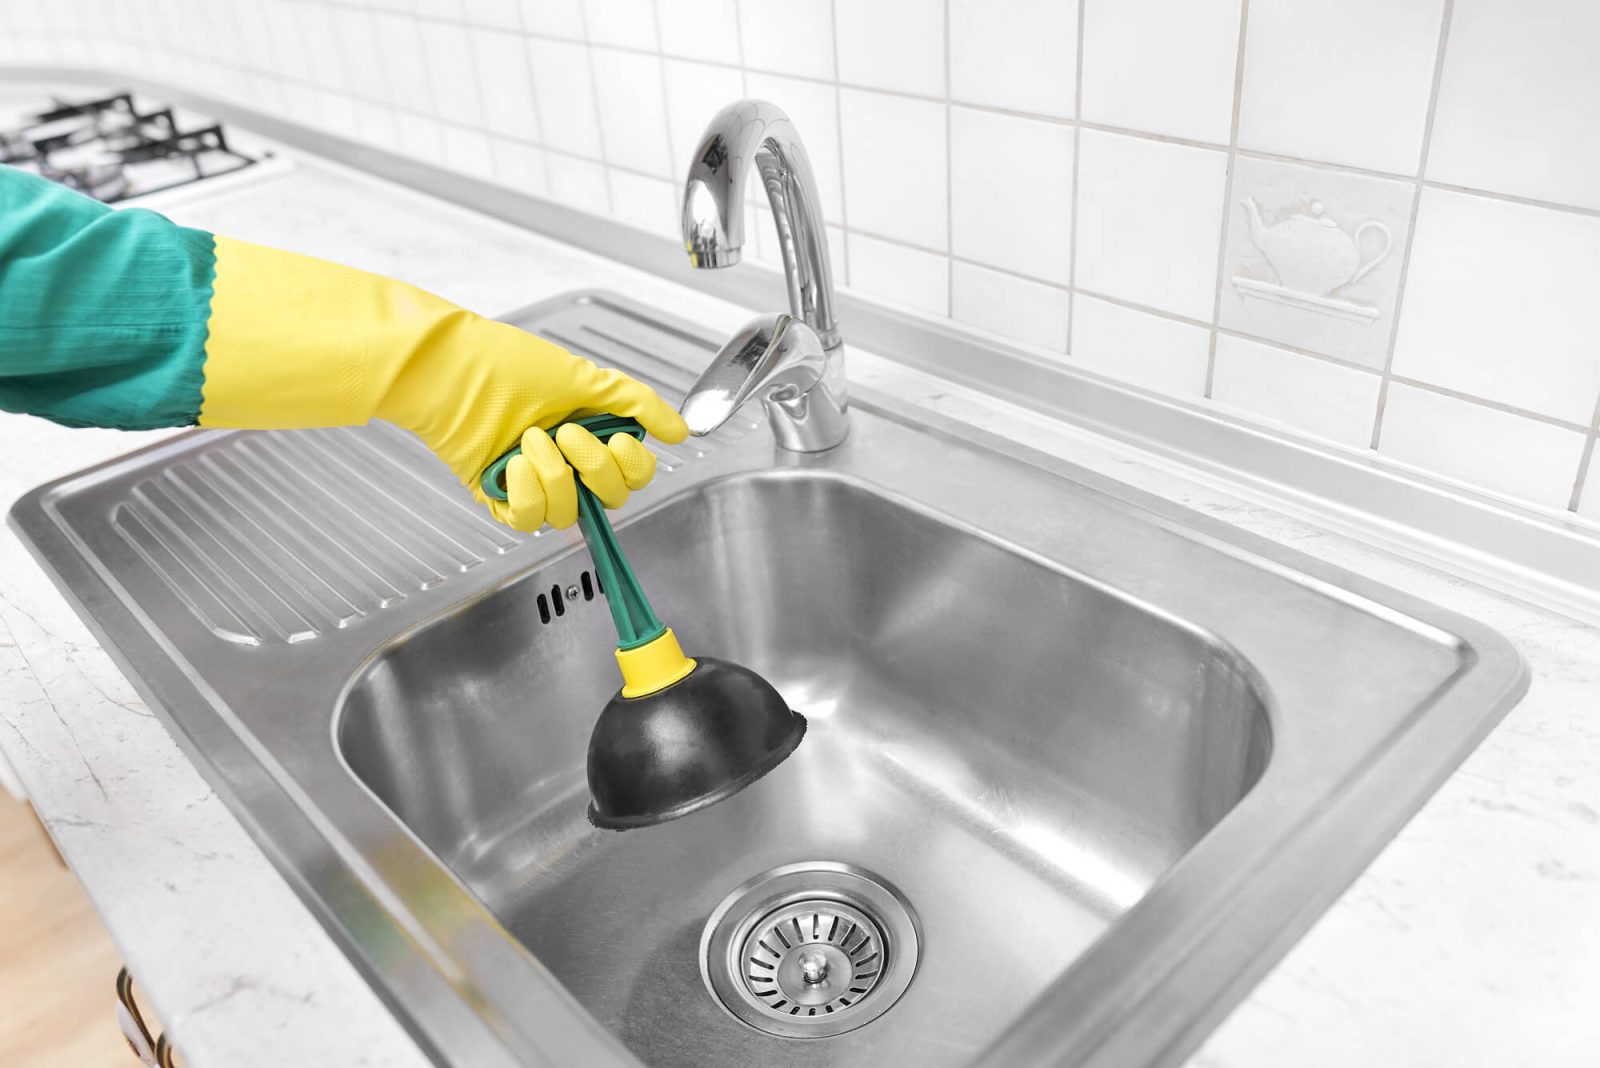 Disinfect Sink Weekly